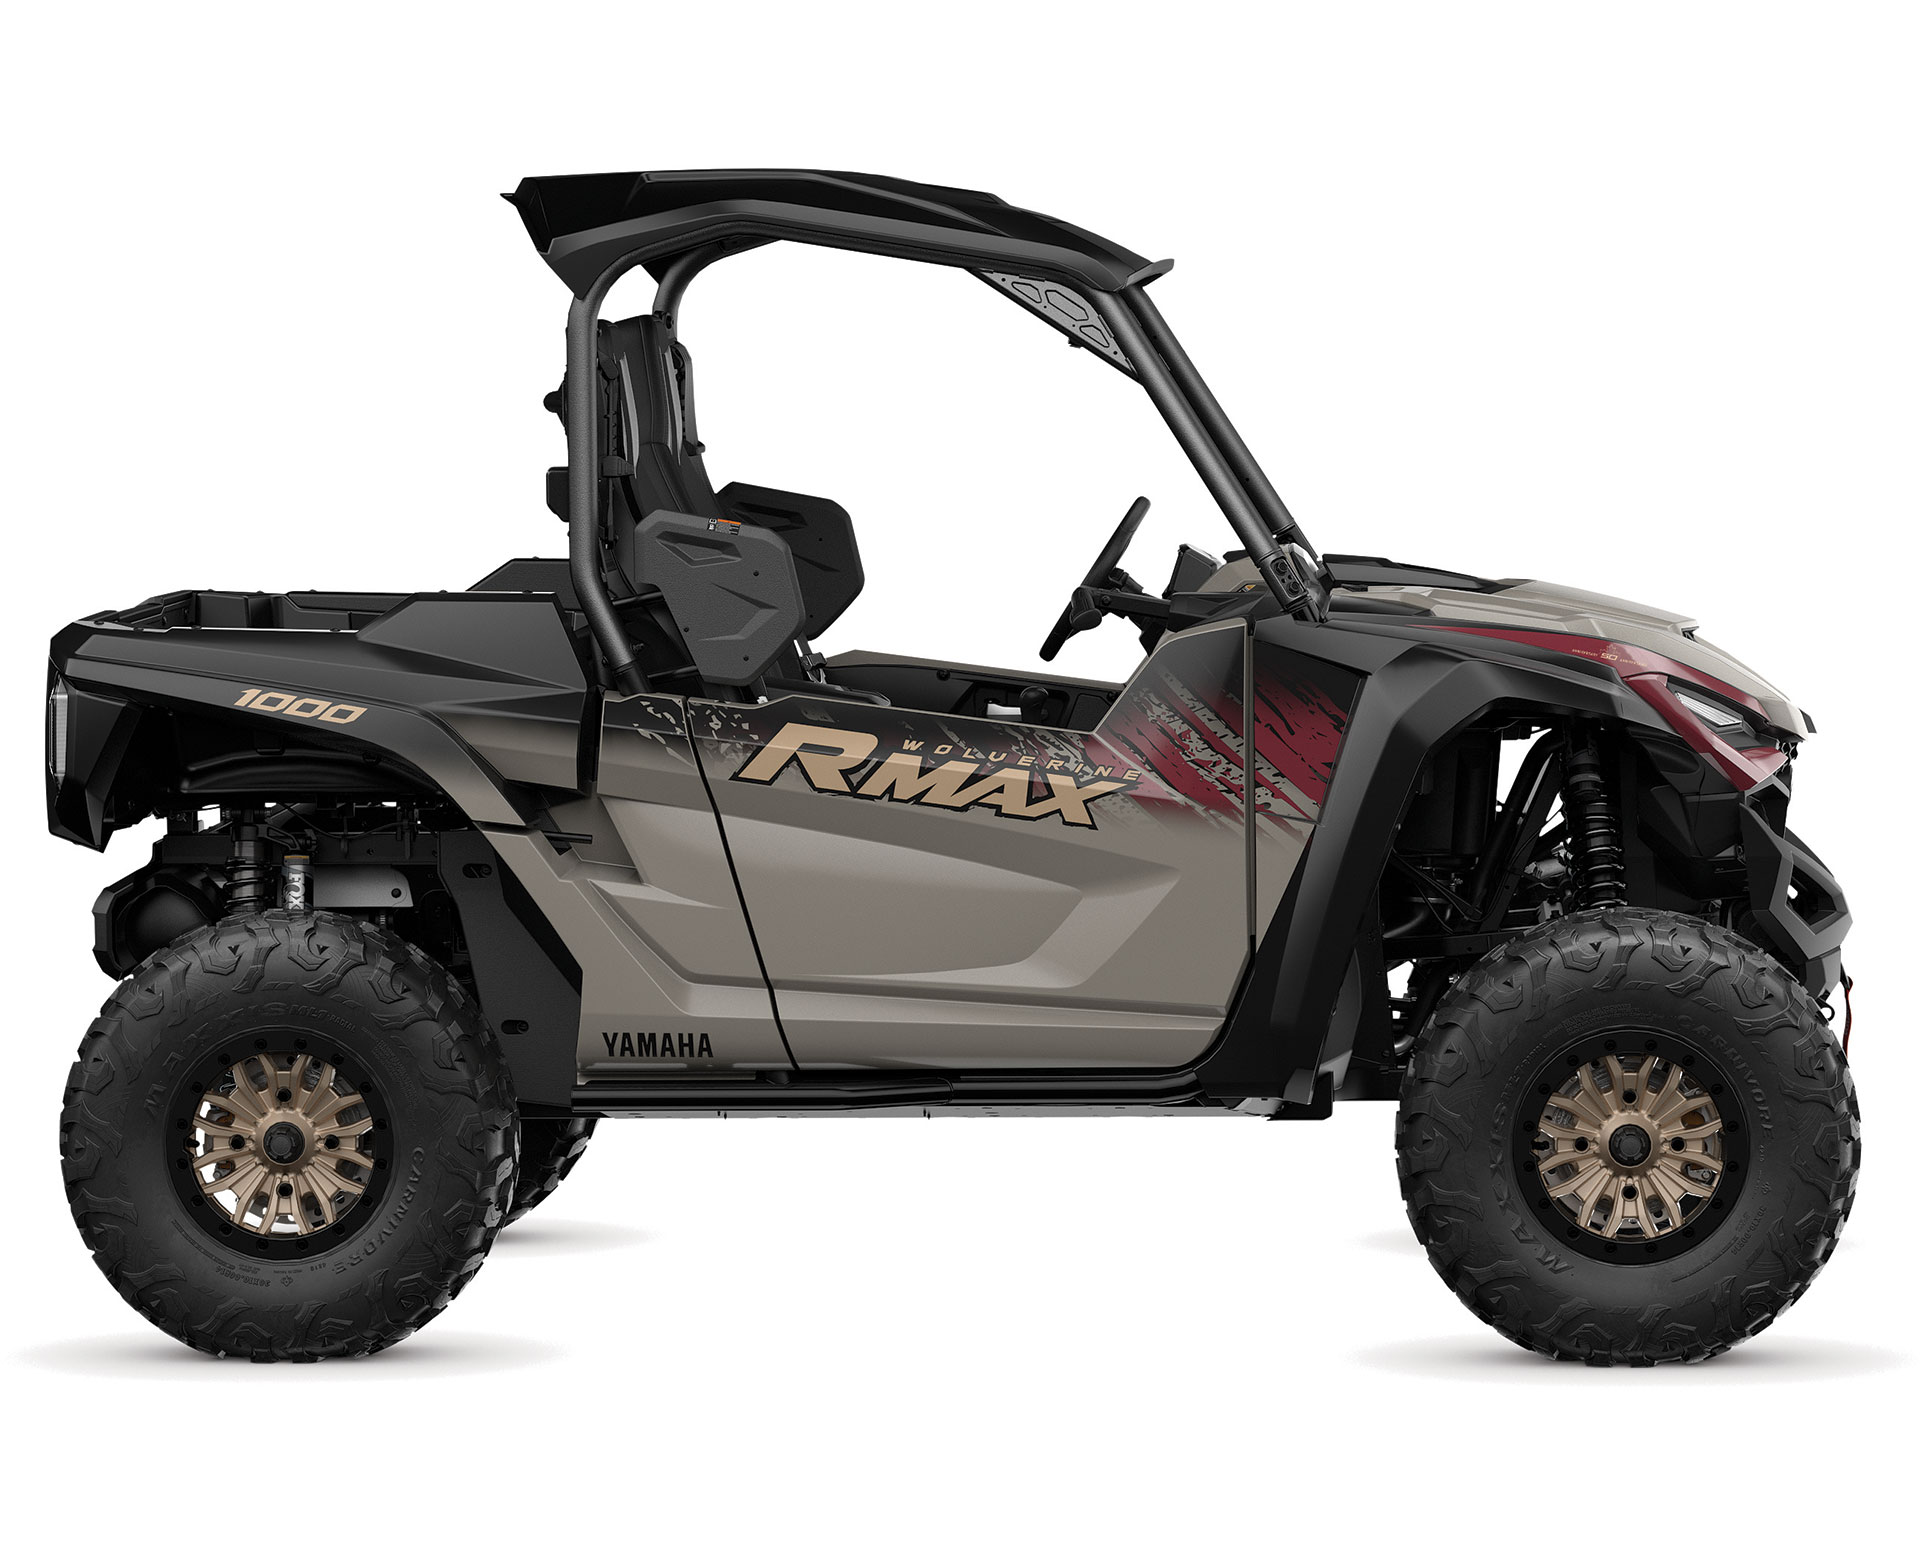 Thumbnail of your customized 2024 WOLVERINE® RMAX2™ 1000 SE